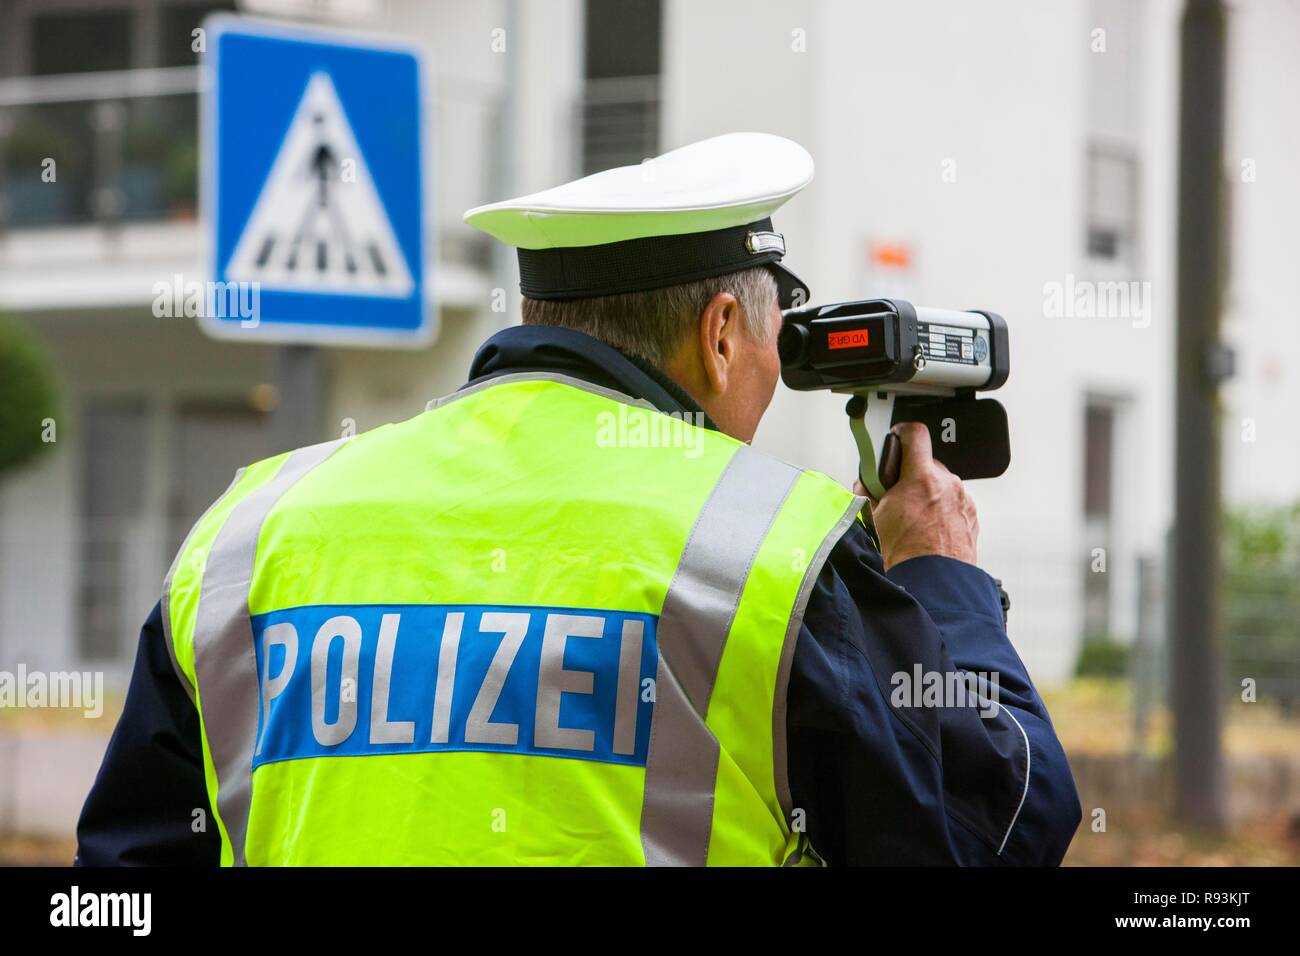 Policeman Operating Speed Radar High Resolution Stock Photography and  Images - Alamy